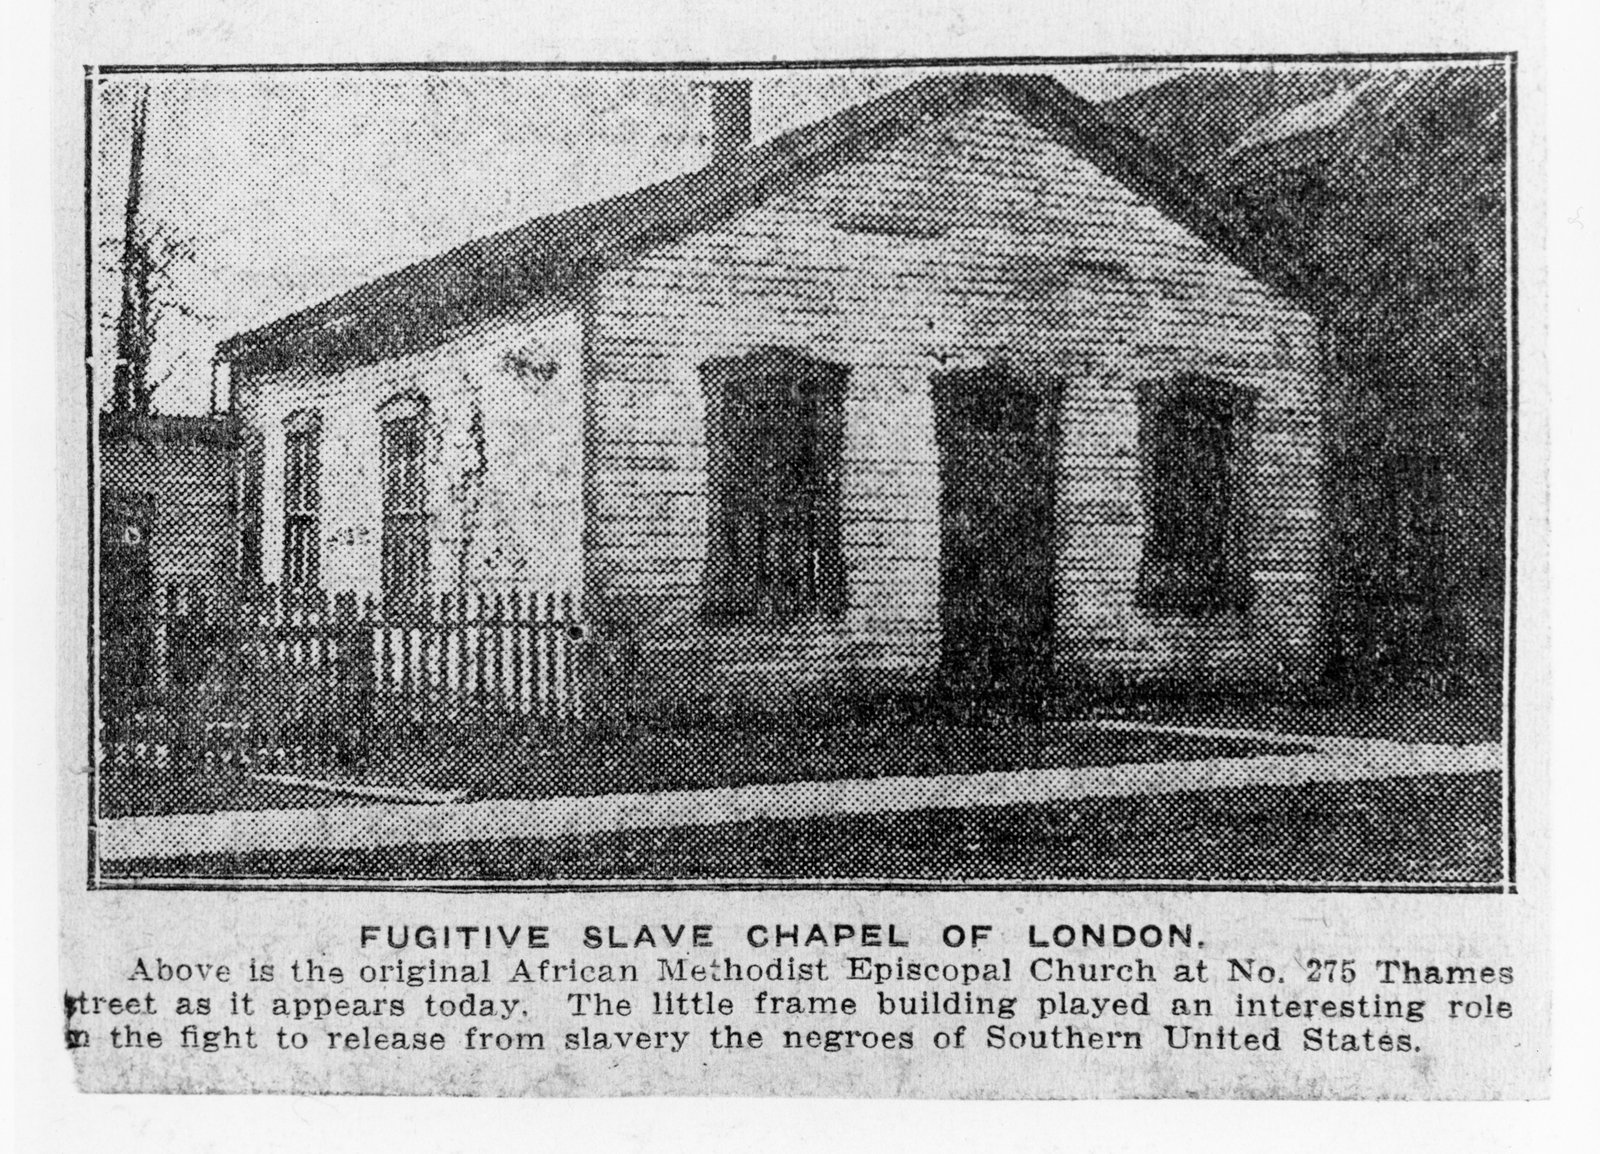 The original African Methodist Episcopal Church at No. 275 Thames Street. Photo courtesy of London Library